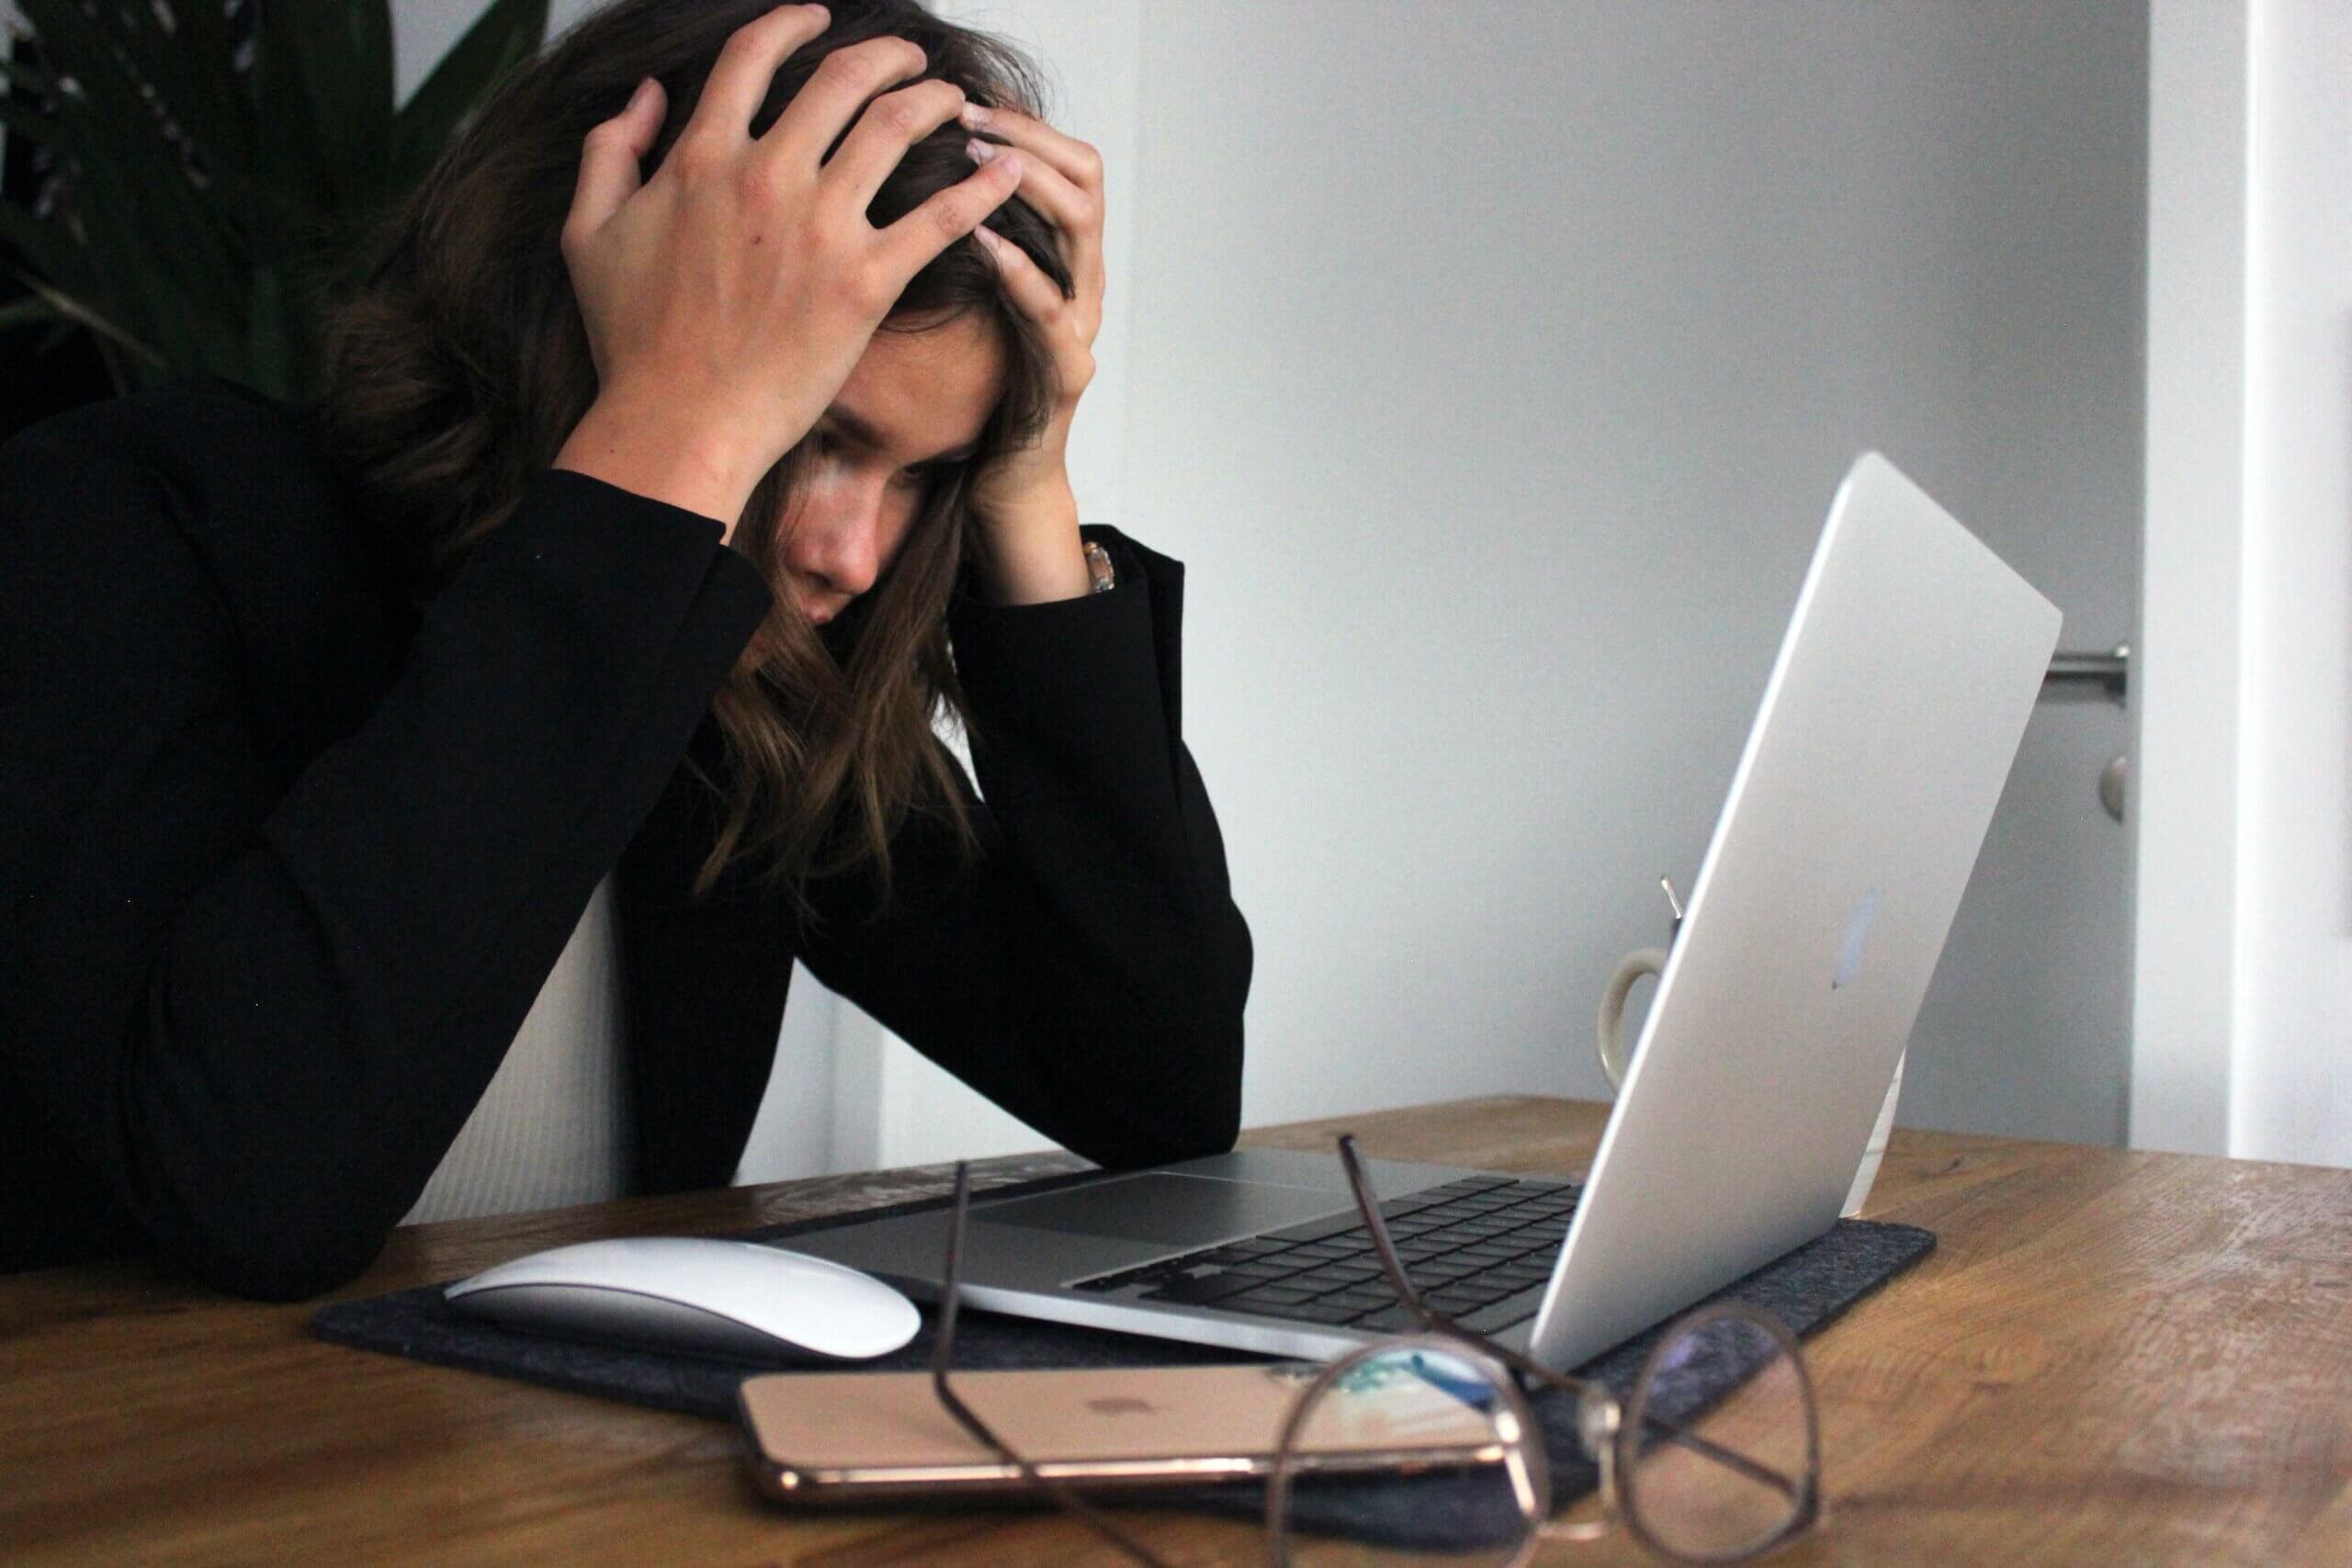 Woman looking at her laptop, appearing to be frustrated